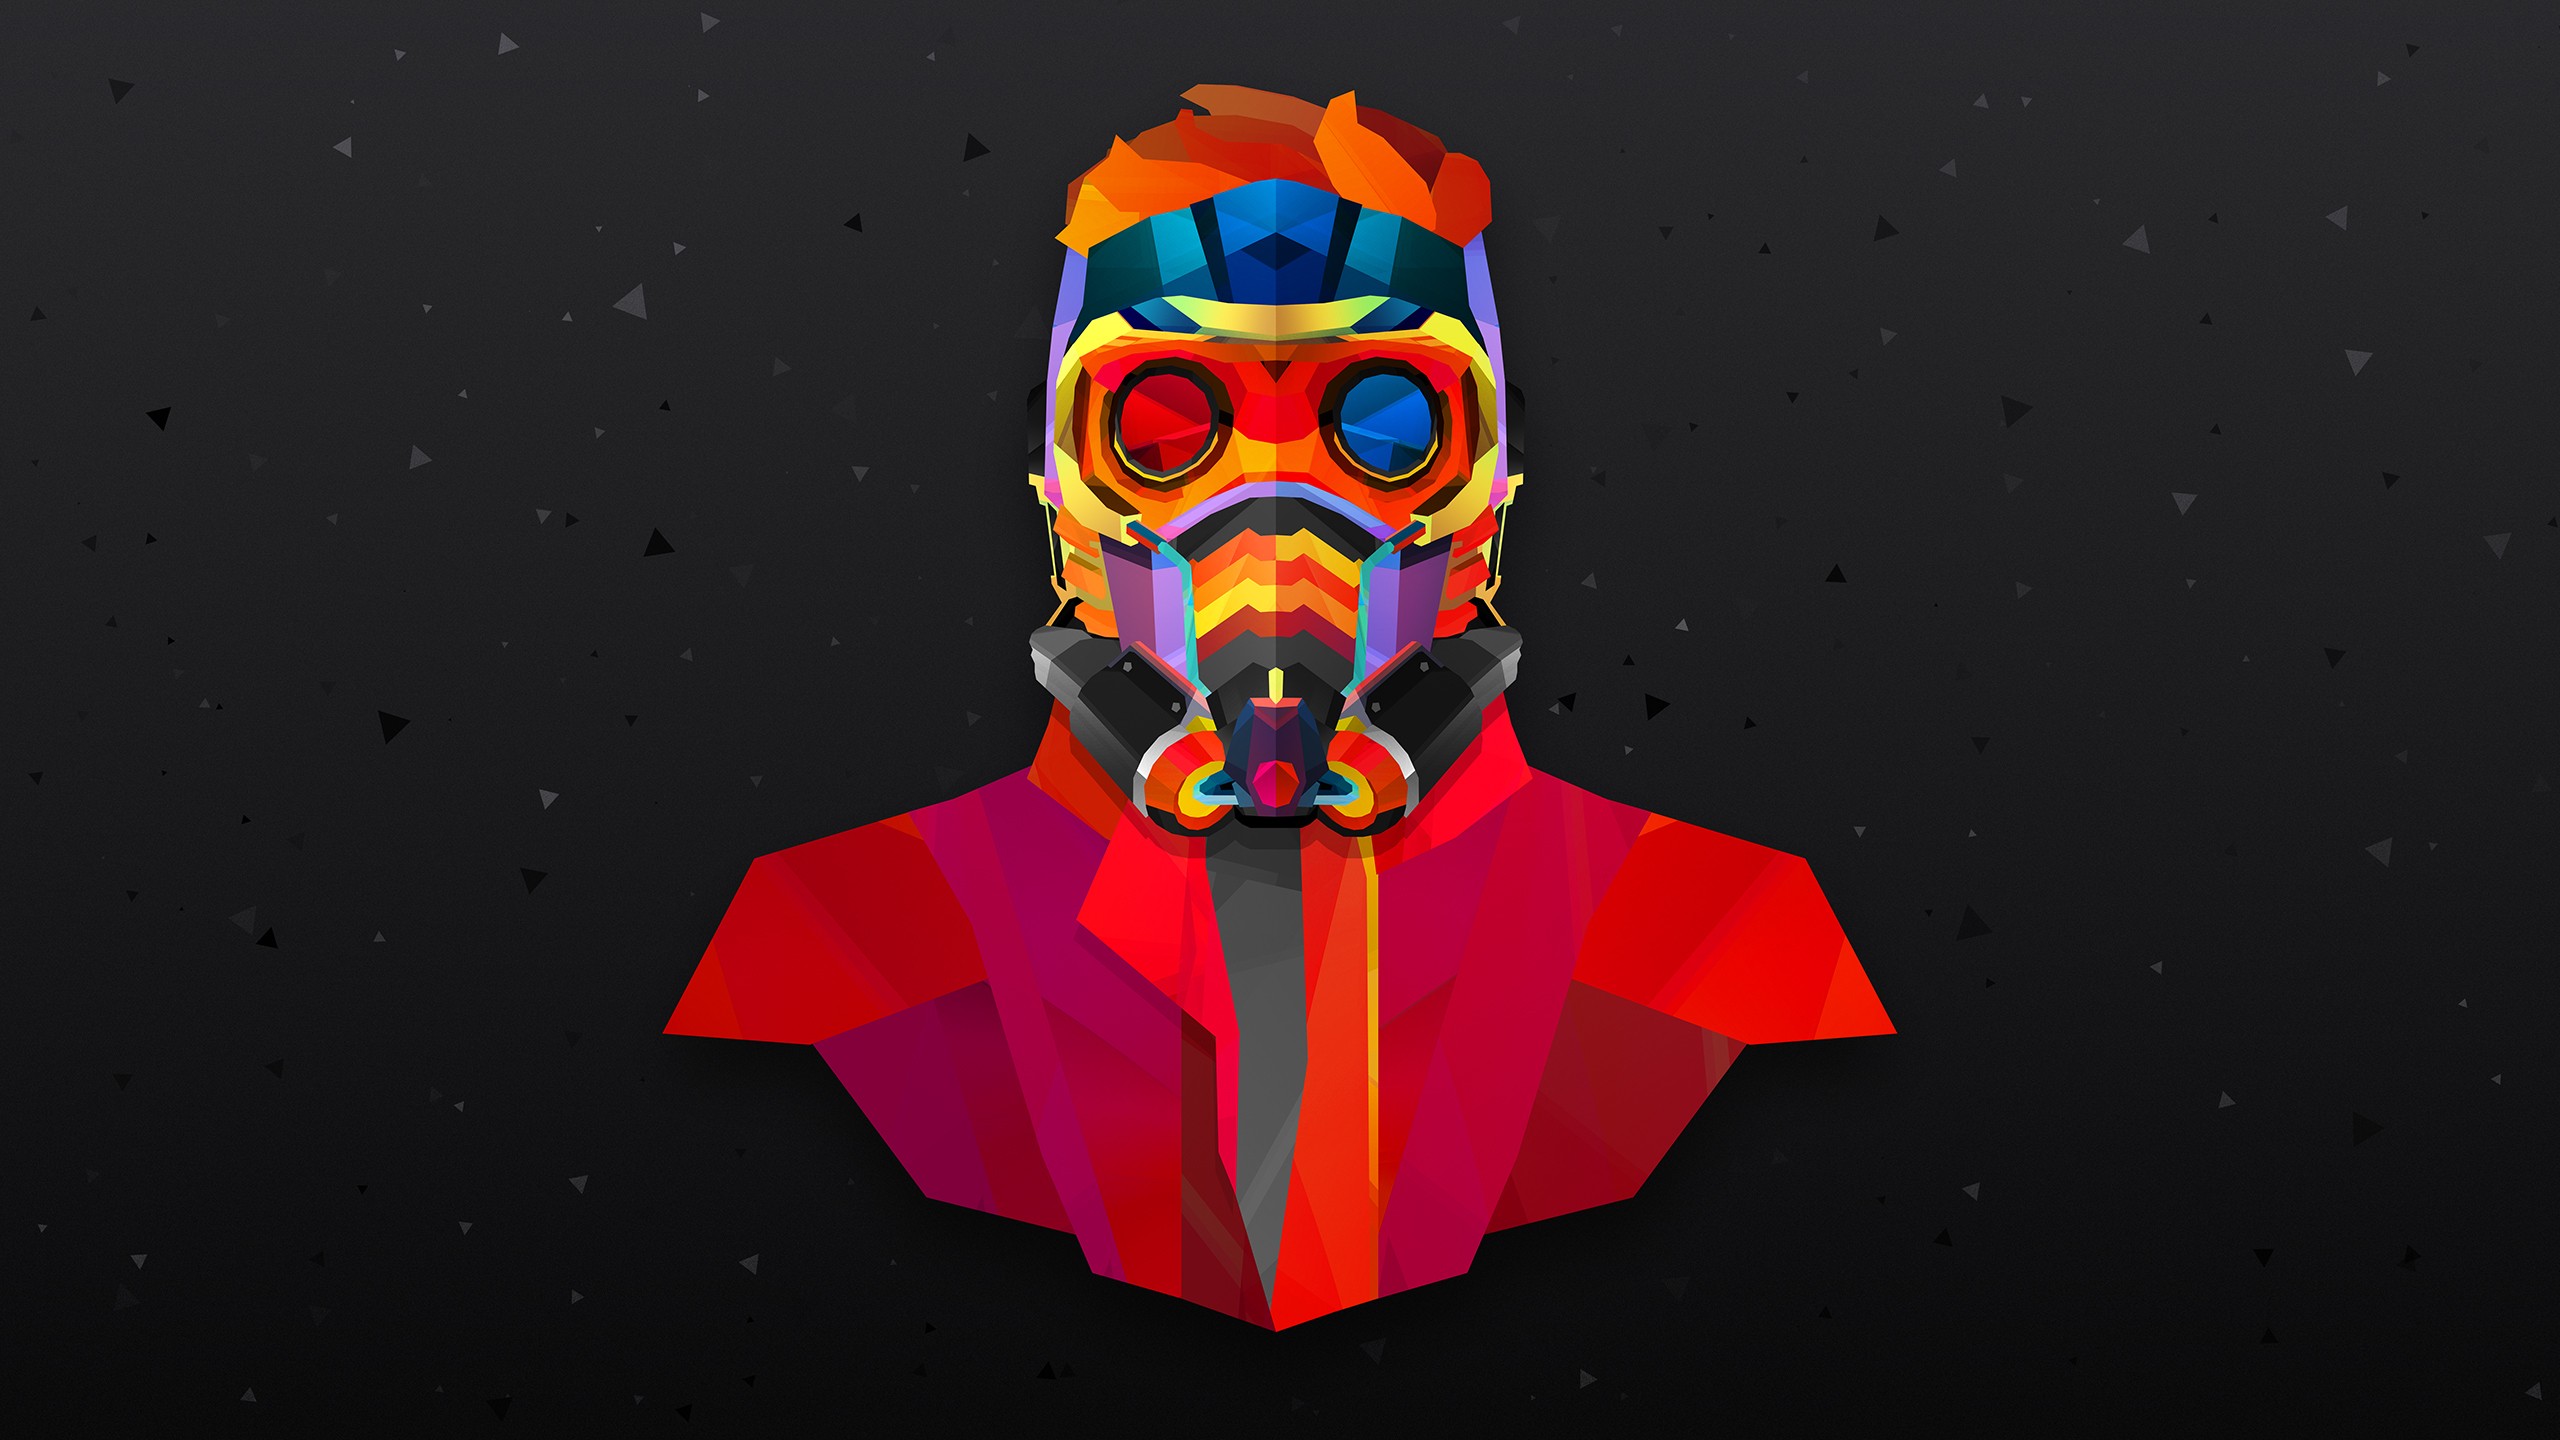 Download Star Lord Colorful 1280x960 Resolution, Full HD 